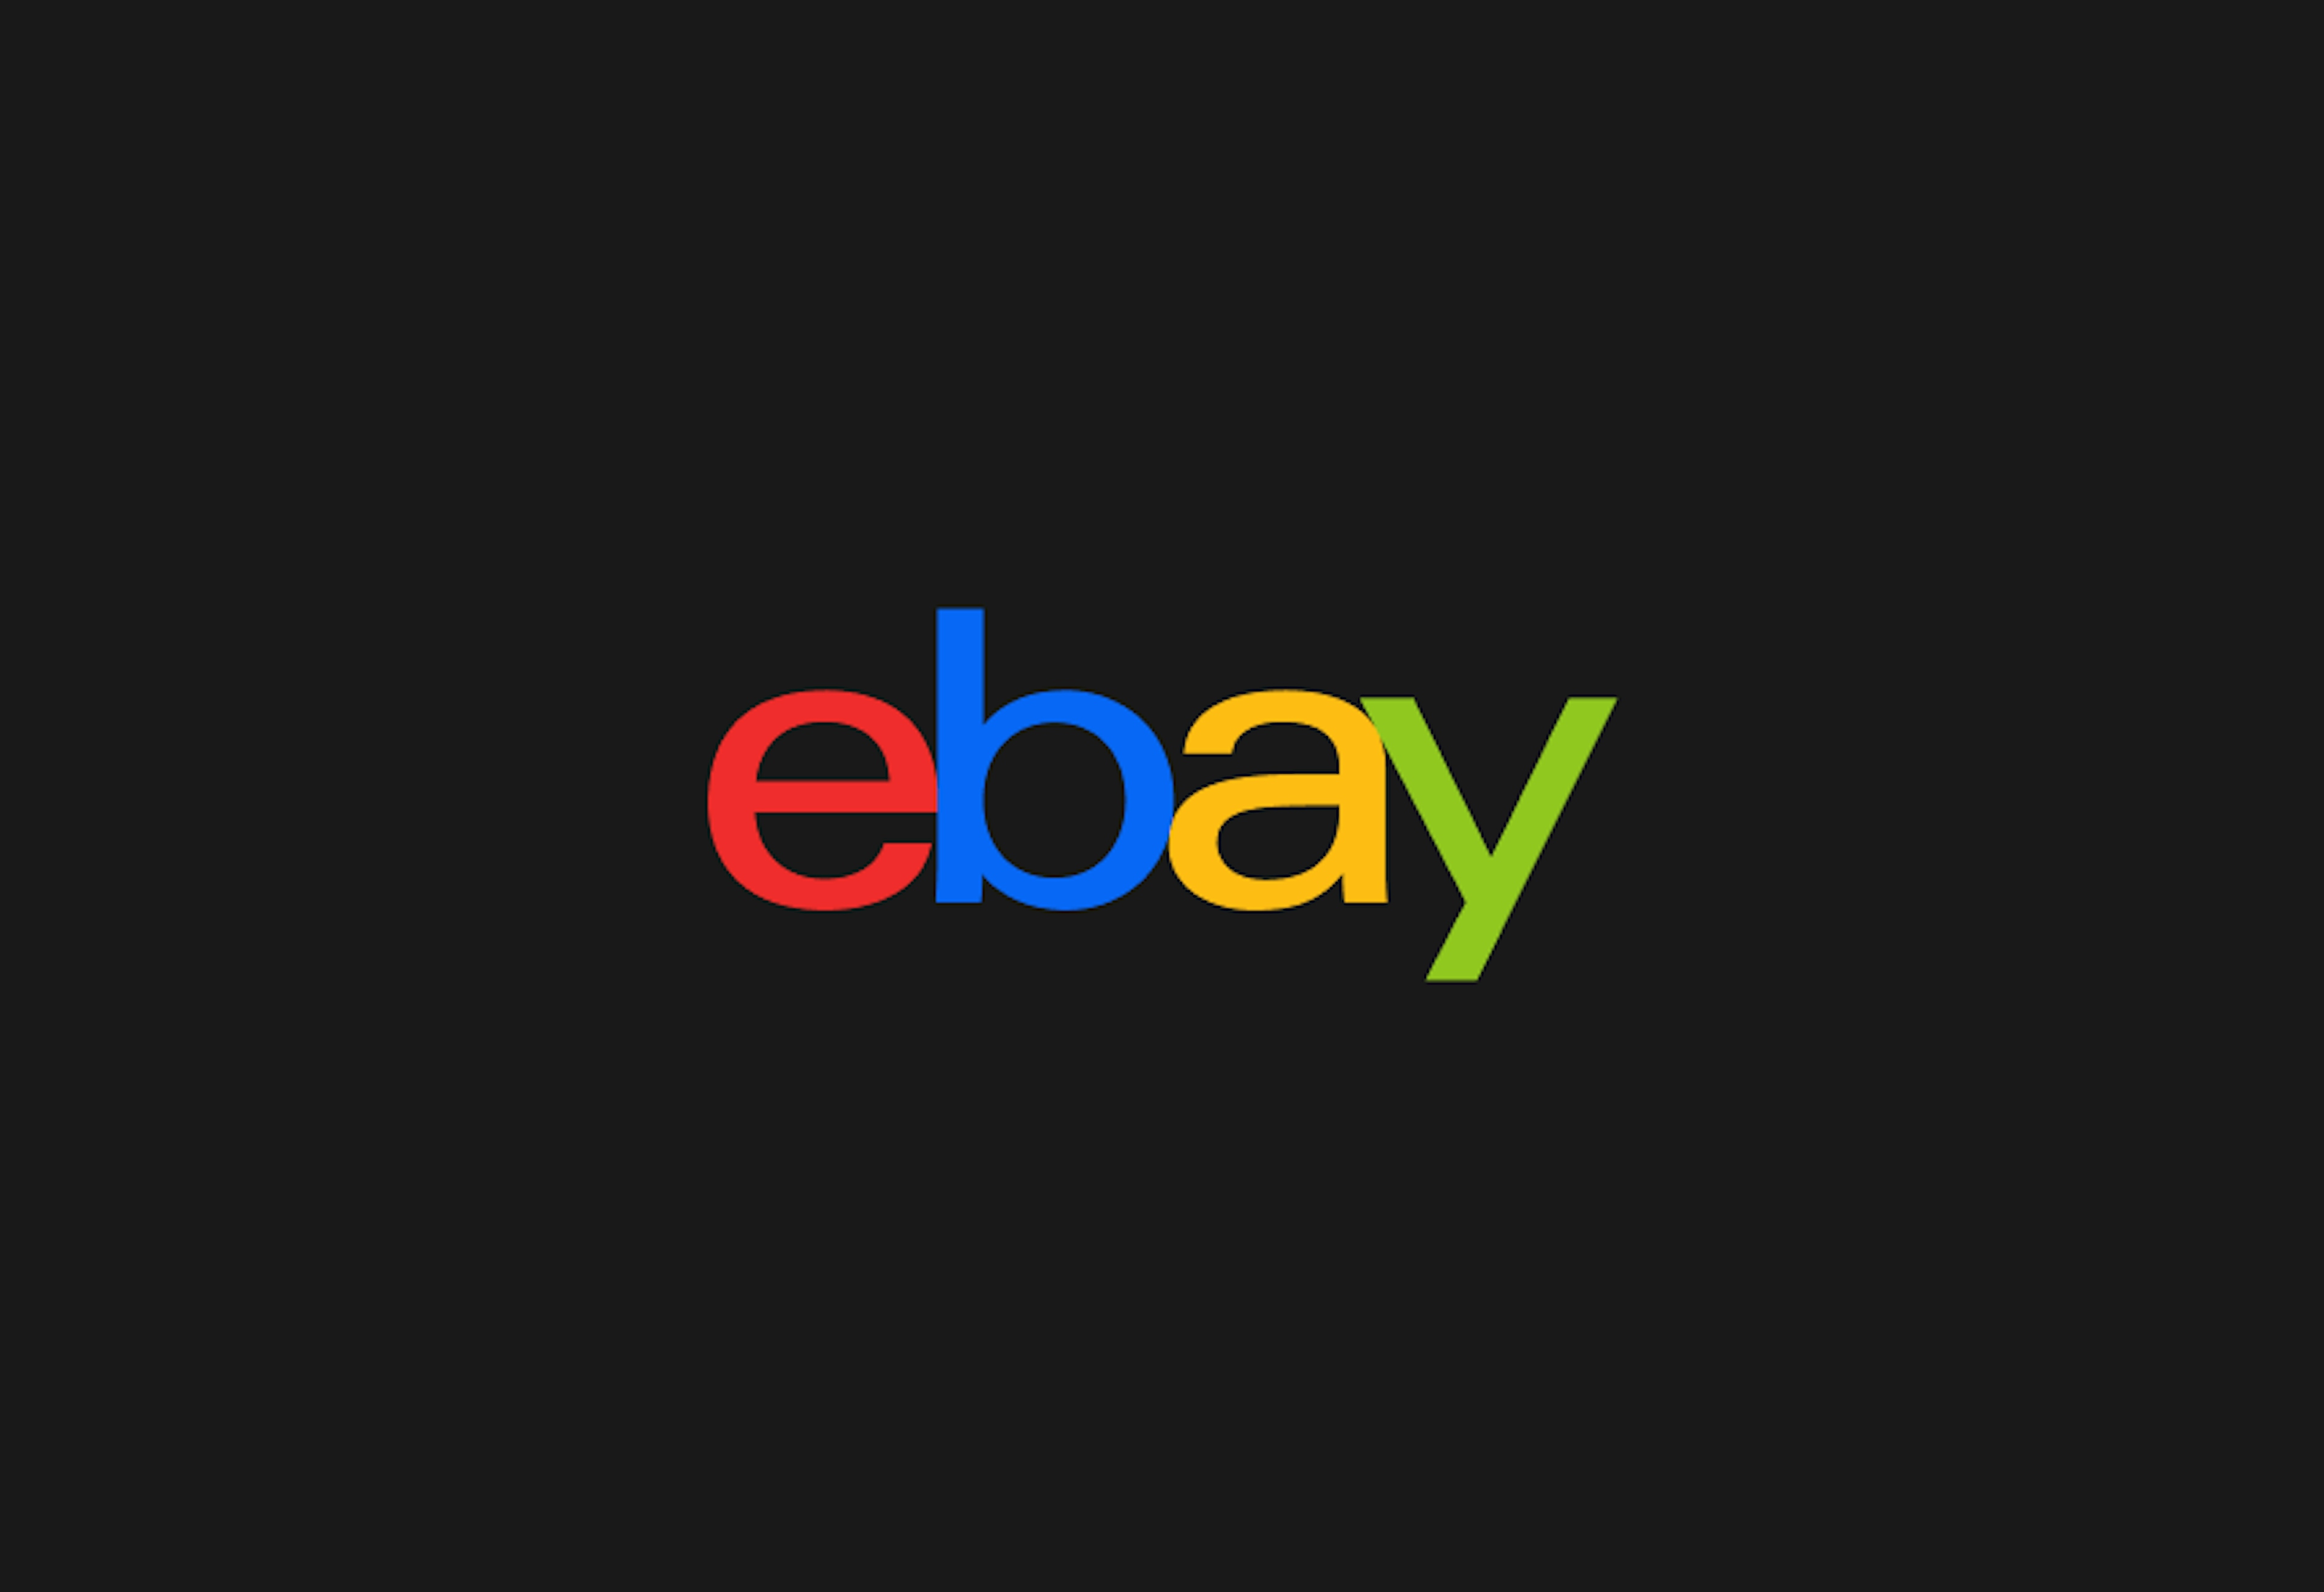 The colored eBay logo over a black background.